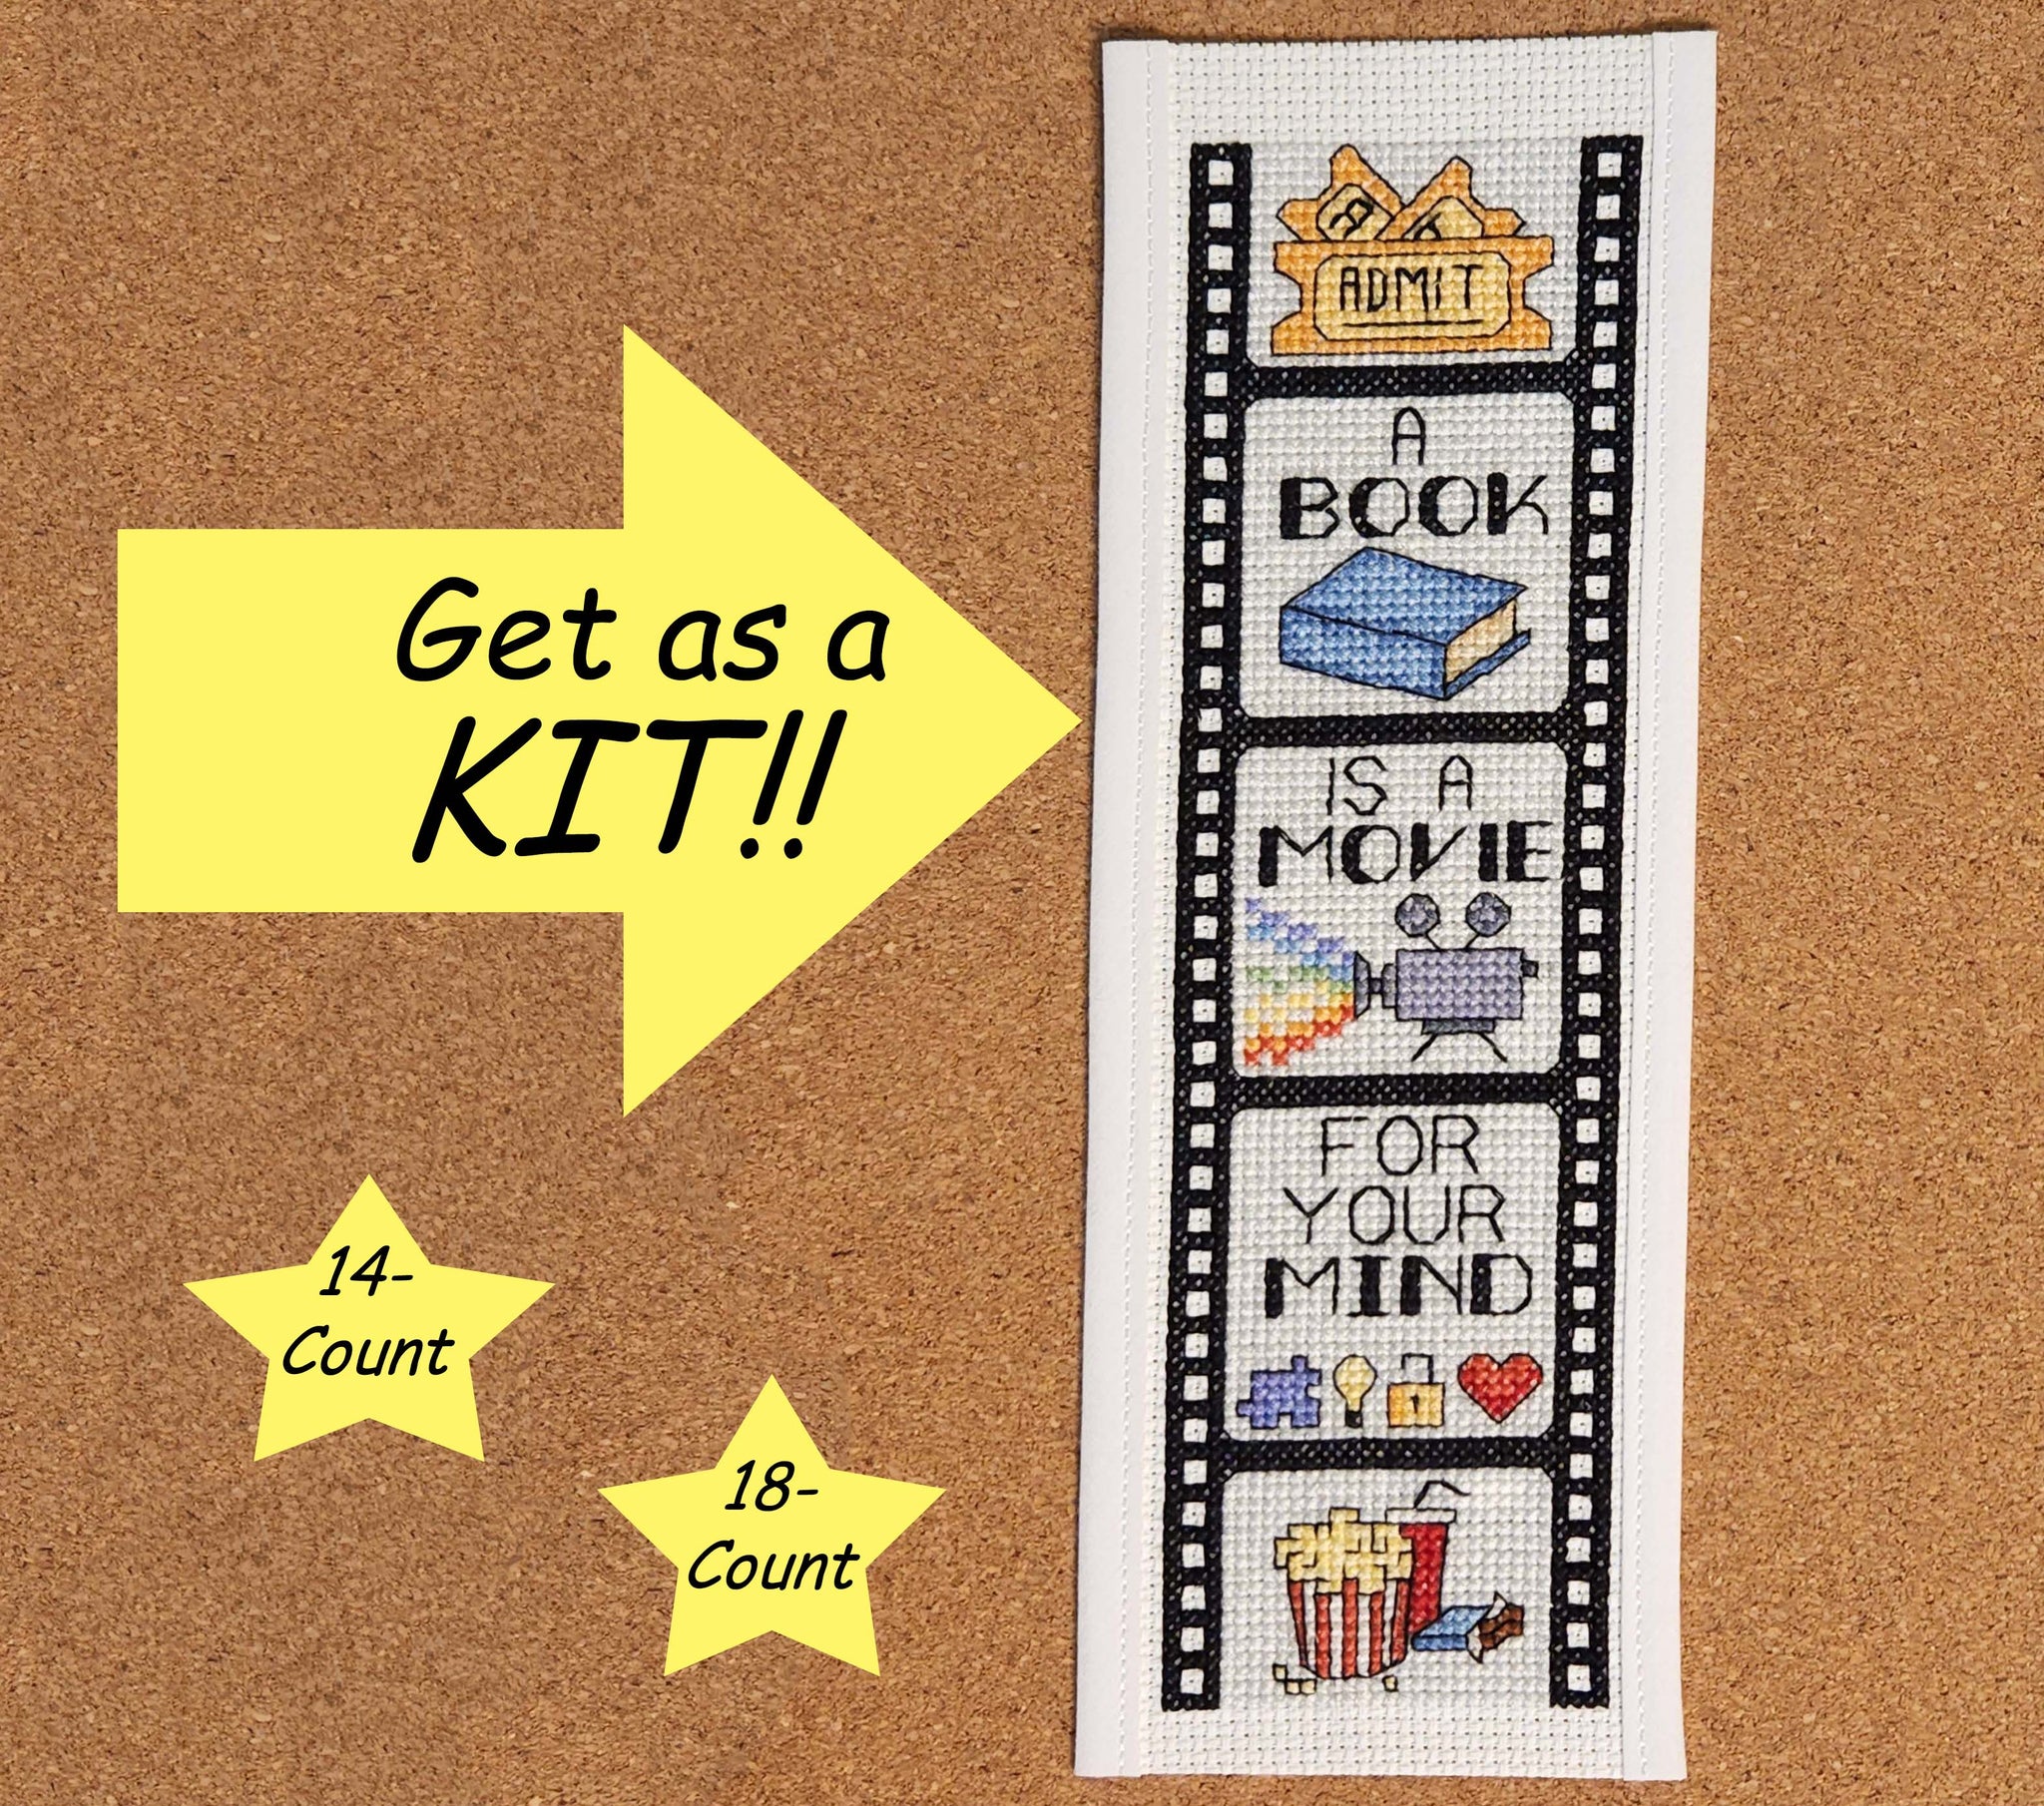 Movie for Your Mind - Cross Stitch Kit